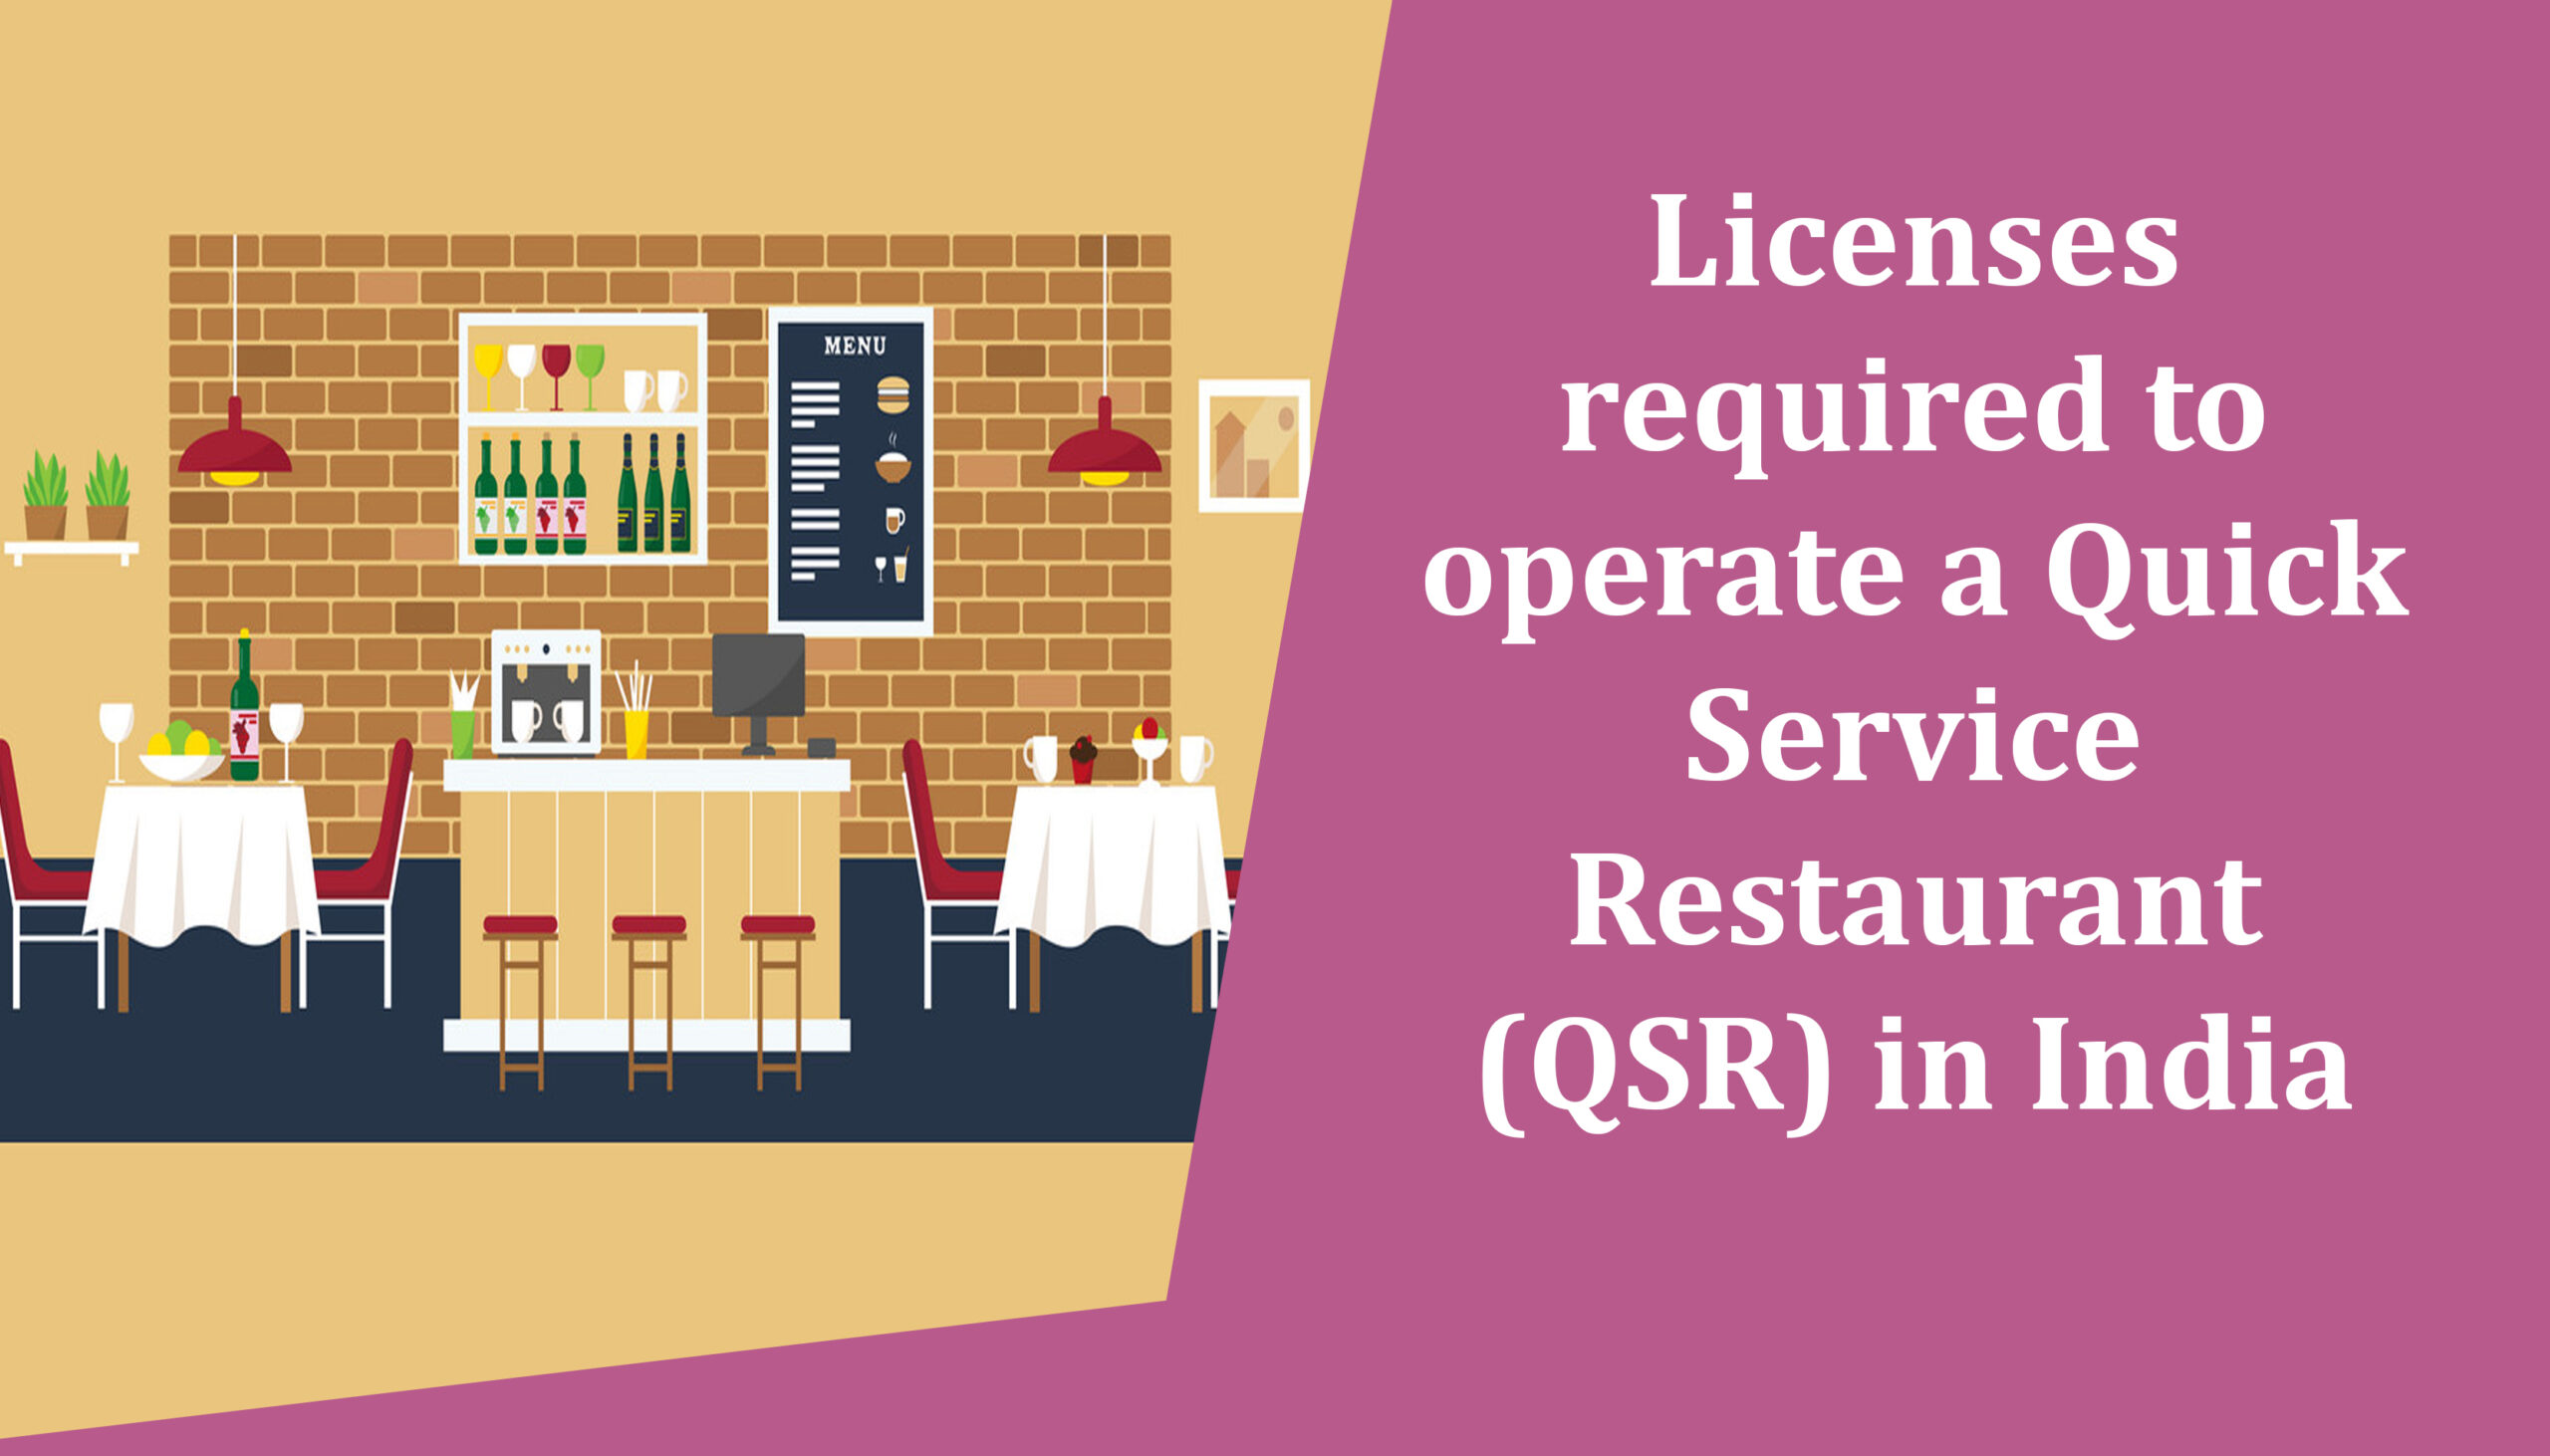 Licenses required to operate a Quick Service Restaurant (QSR) in India